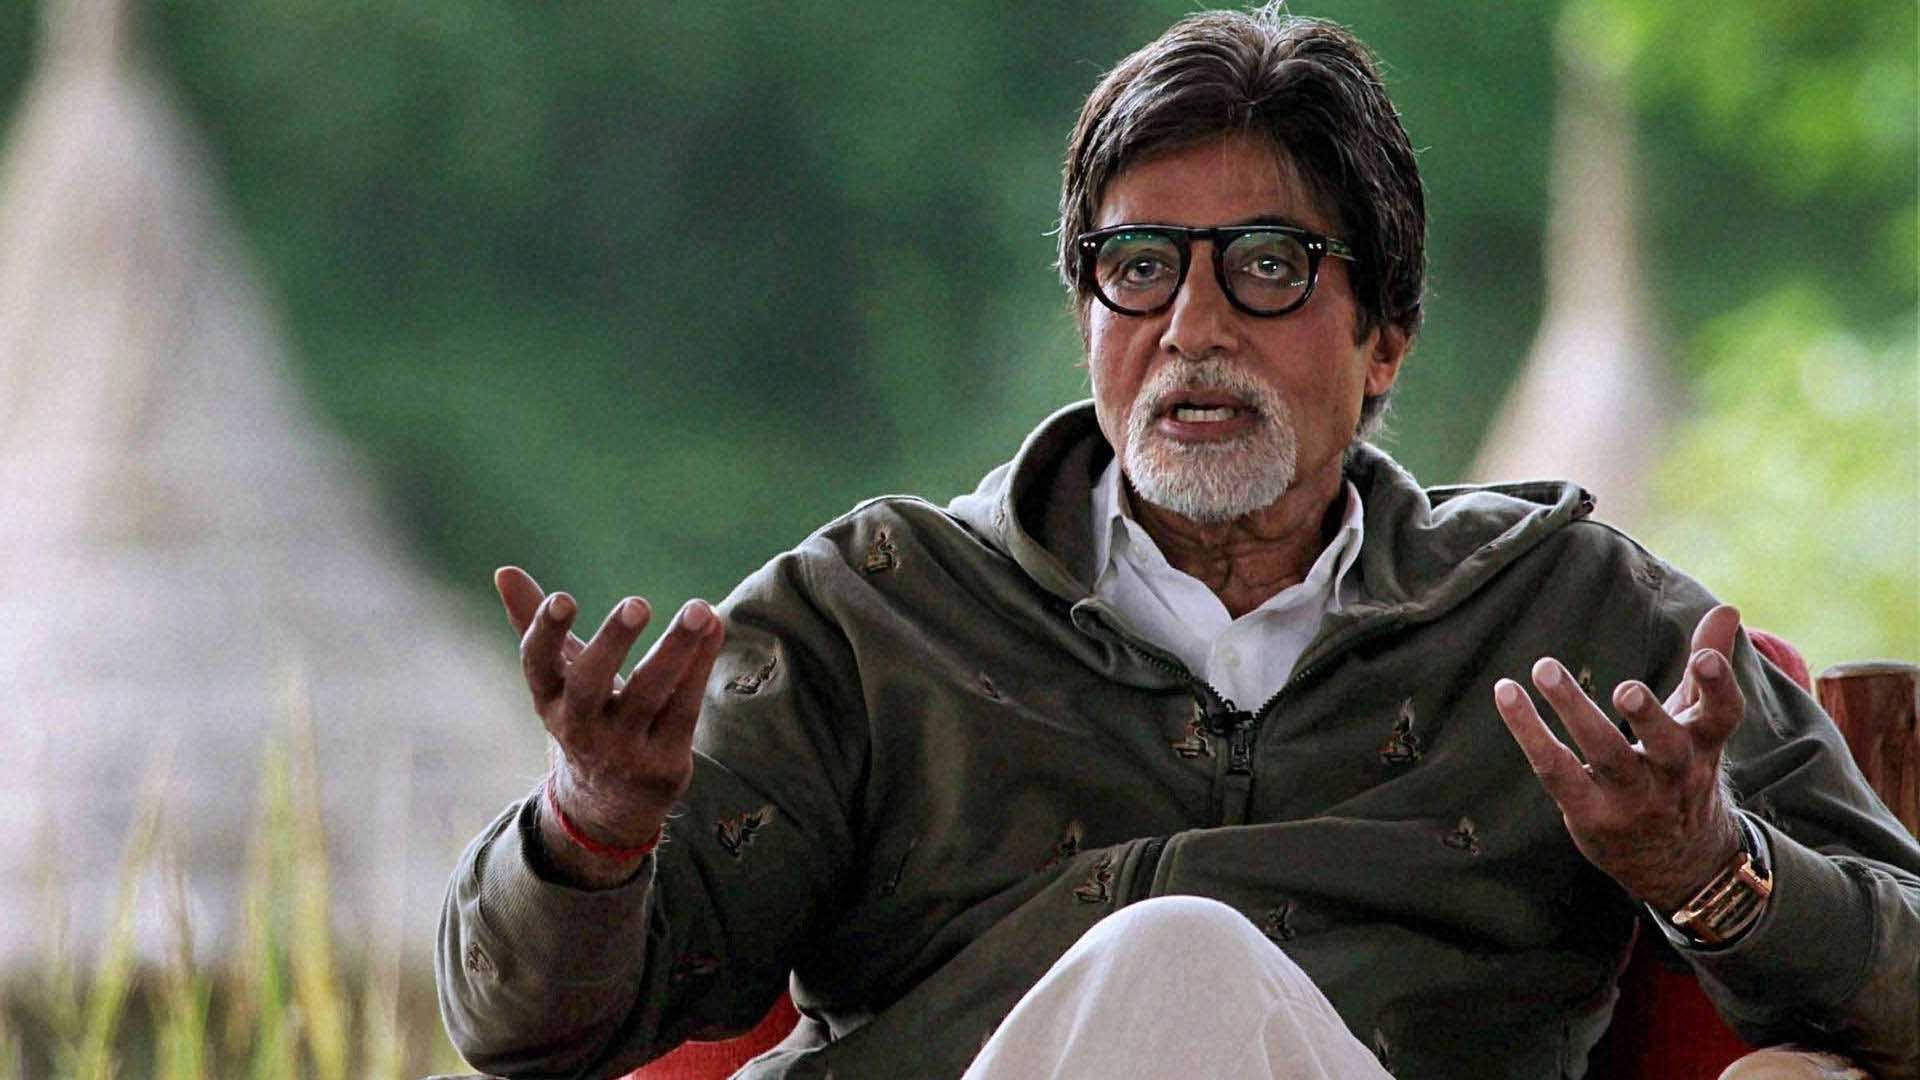 Actor Amitabh Bachchan wallpapers and photos for desktop and mobile